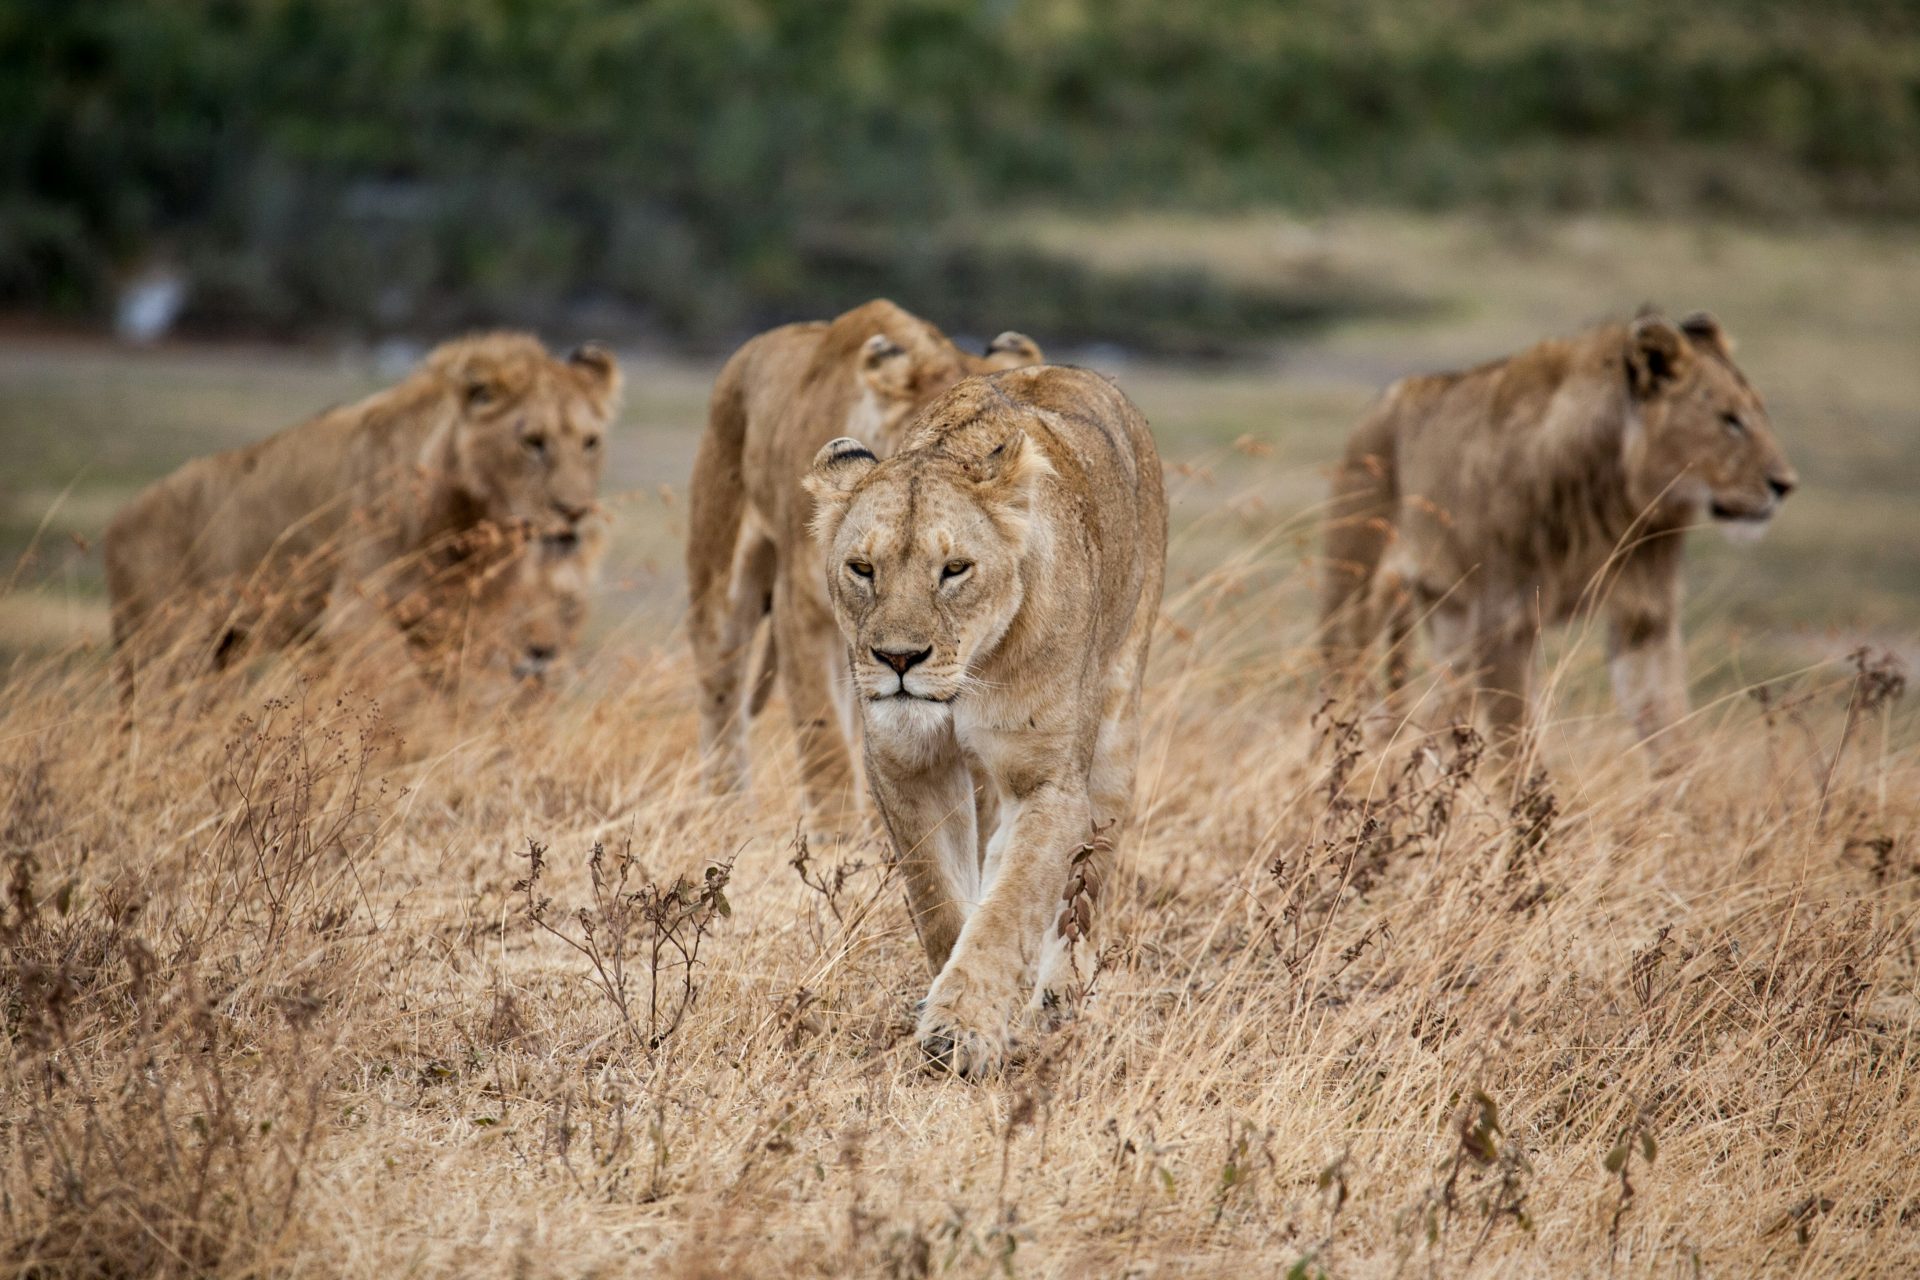 <p><span>This concept was also detailed by Smithsonian Magazine when answering a question about why lions didn’t attack tourists when they were on safari. The short answer was that the lions viewed the cars they were in as a threat they couldn’t handle. </span></p> <p>Photo by Jeff Lemond on Unsplash</p>